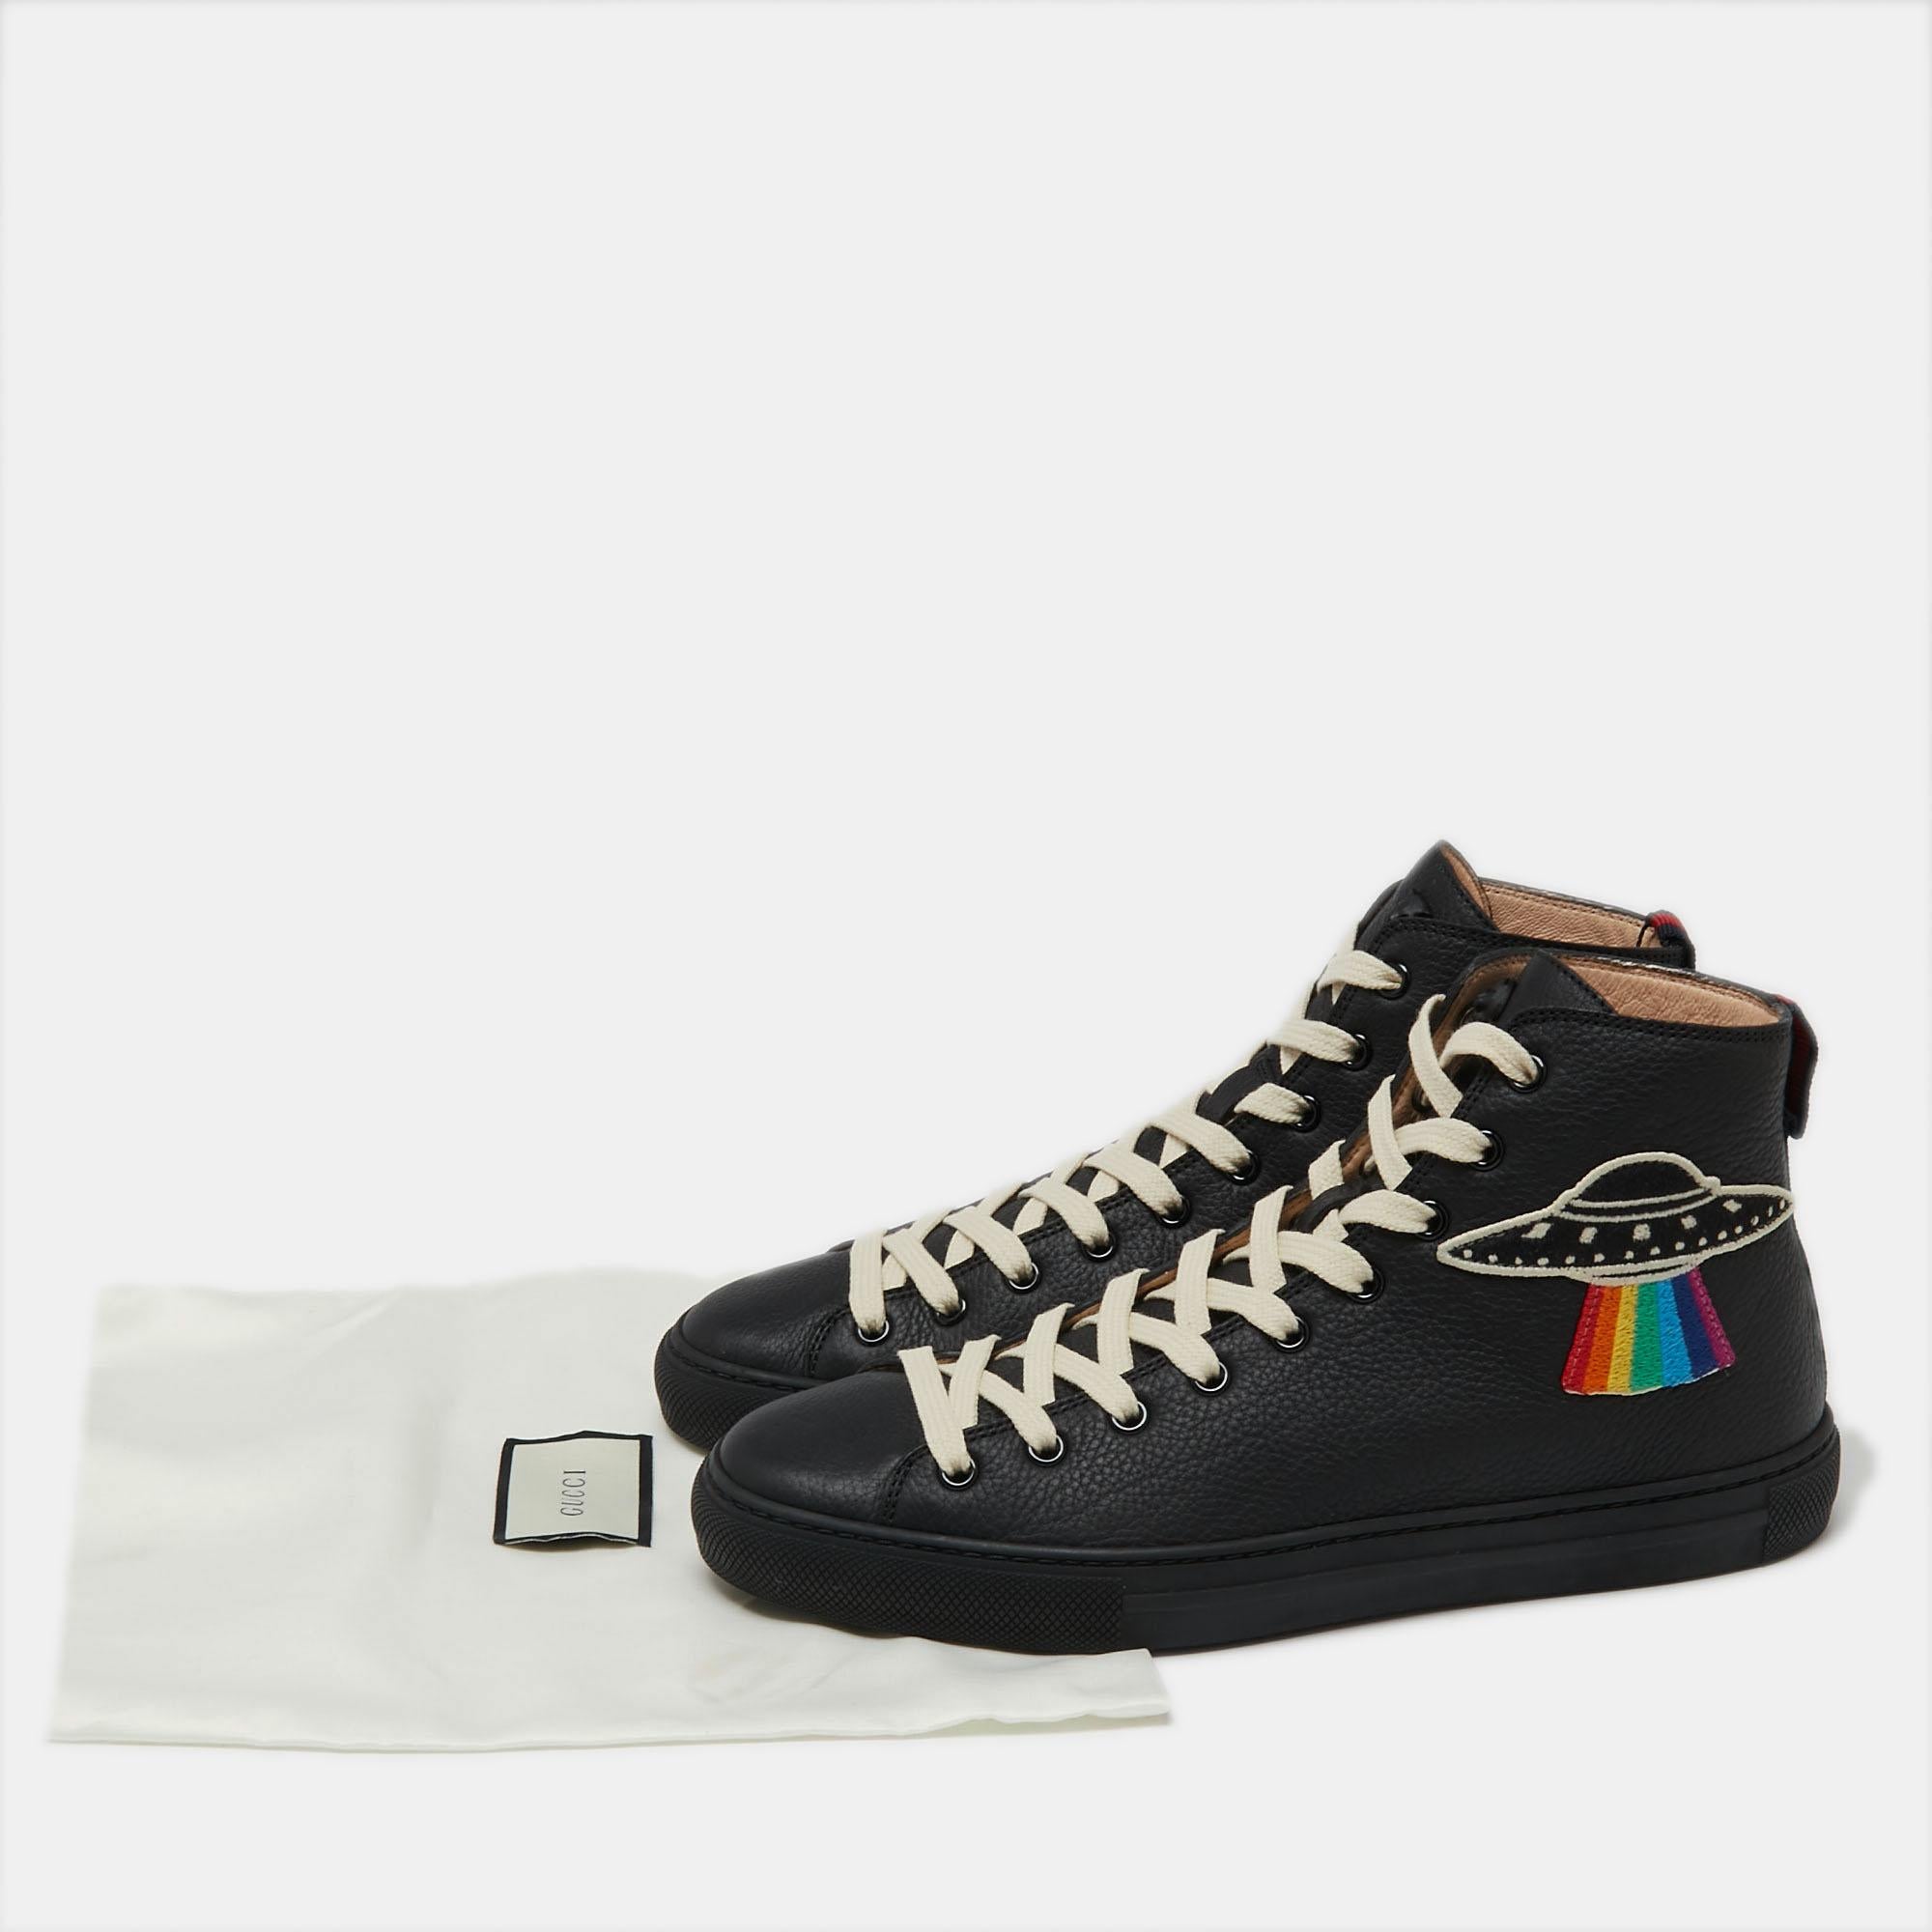 Gucci Black Leather High-Top Sneakers Size 40 2